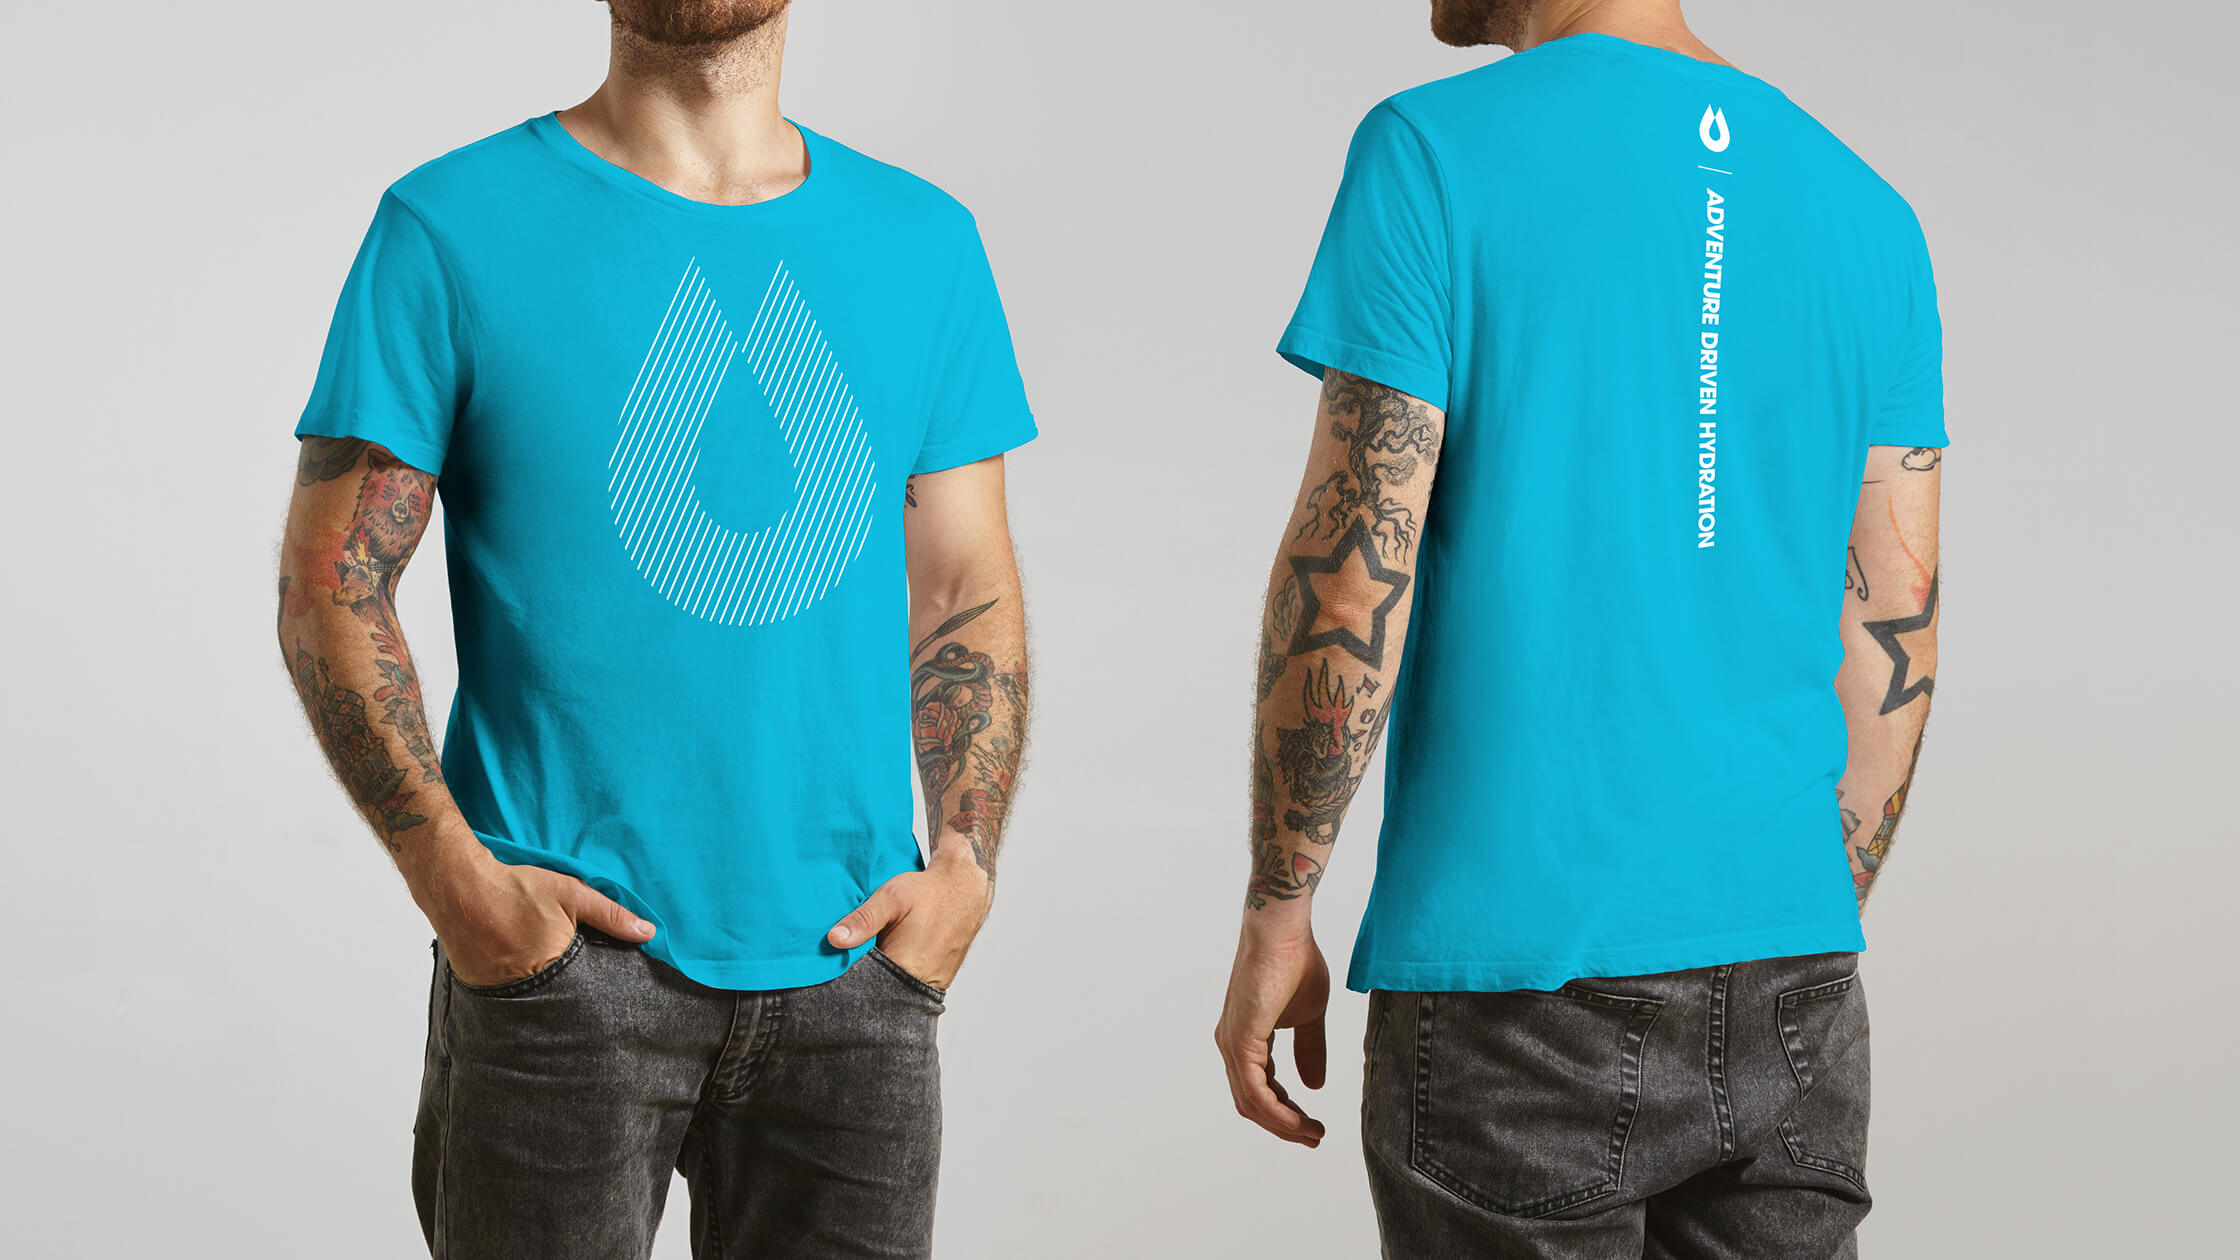 HydraPak double-sided t-shirt, light blue with the symbol on the front and tagline on the back